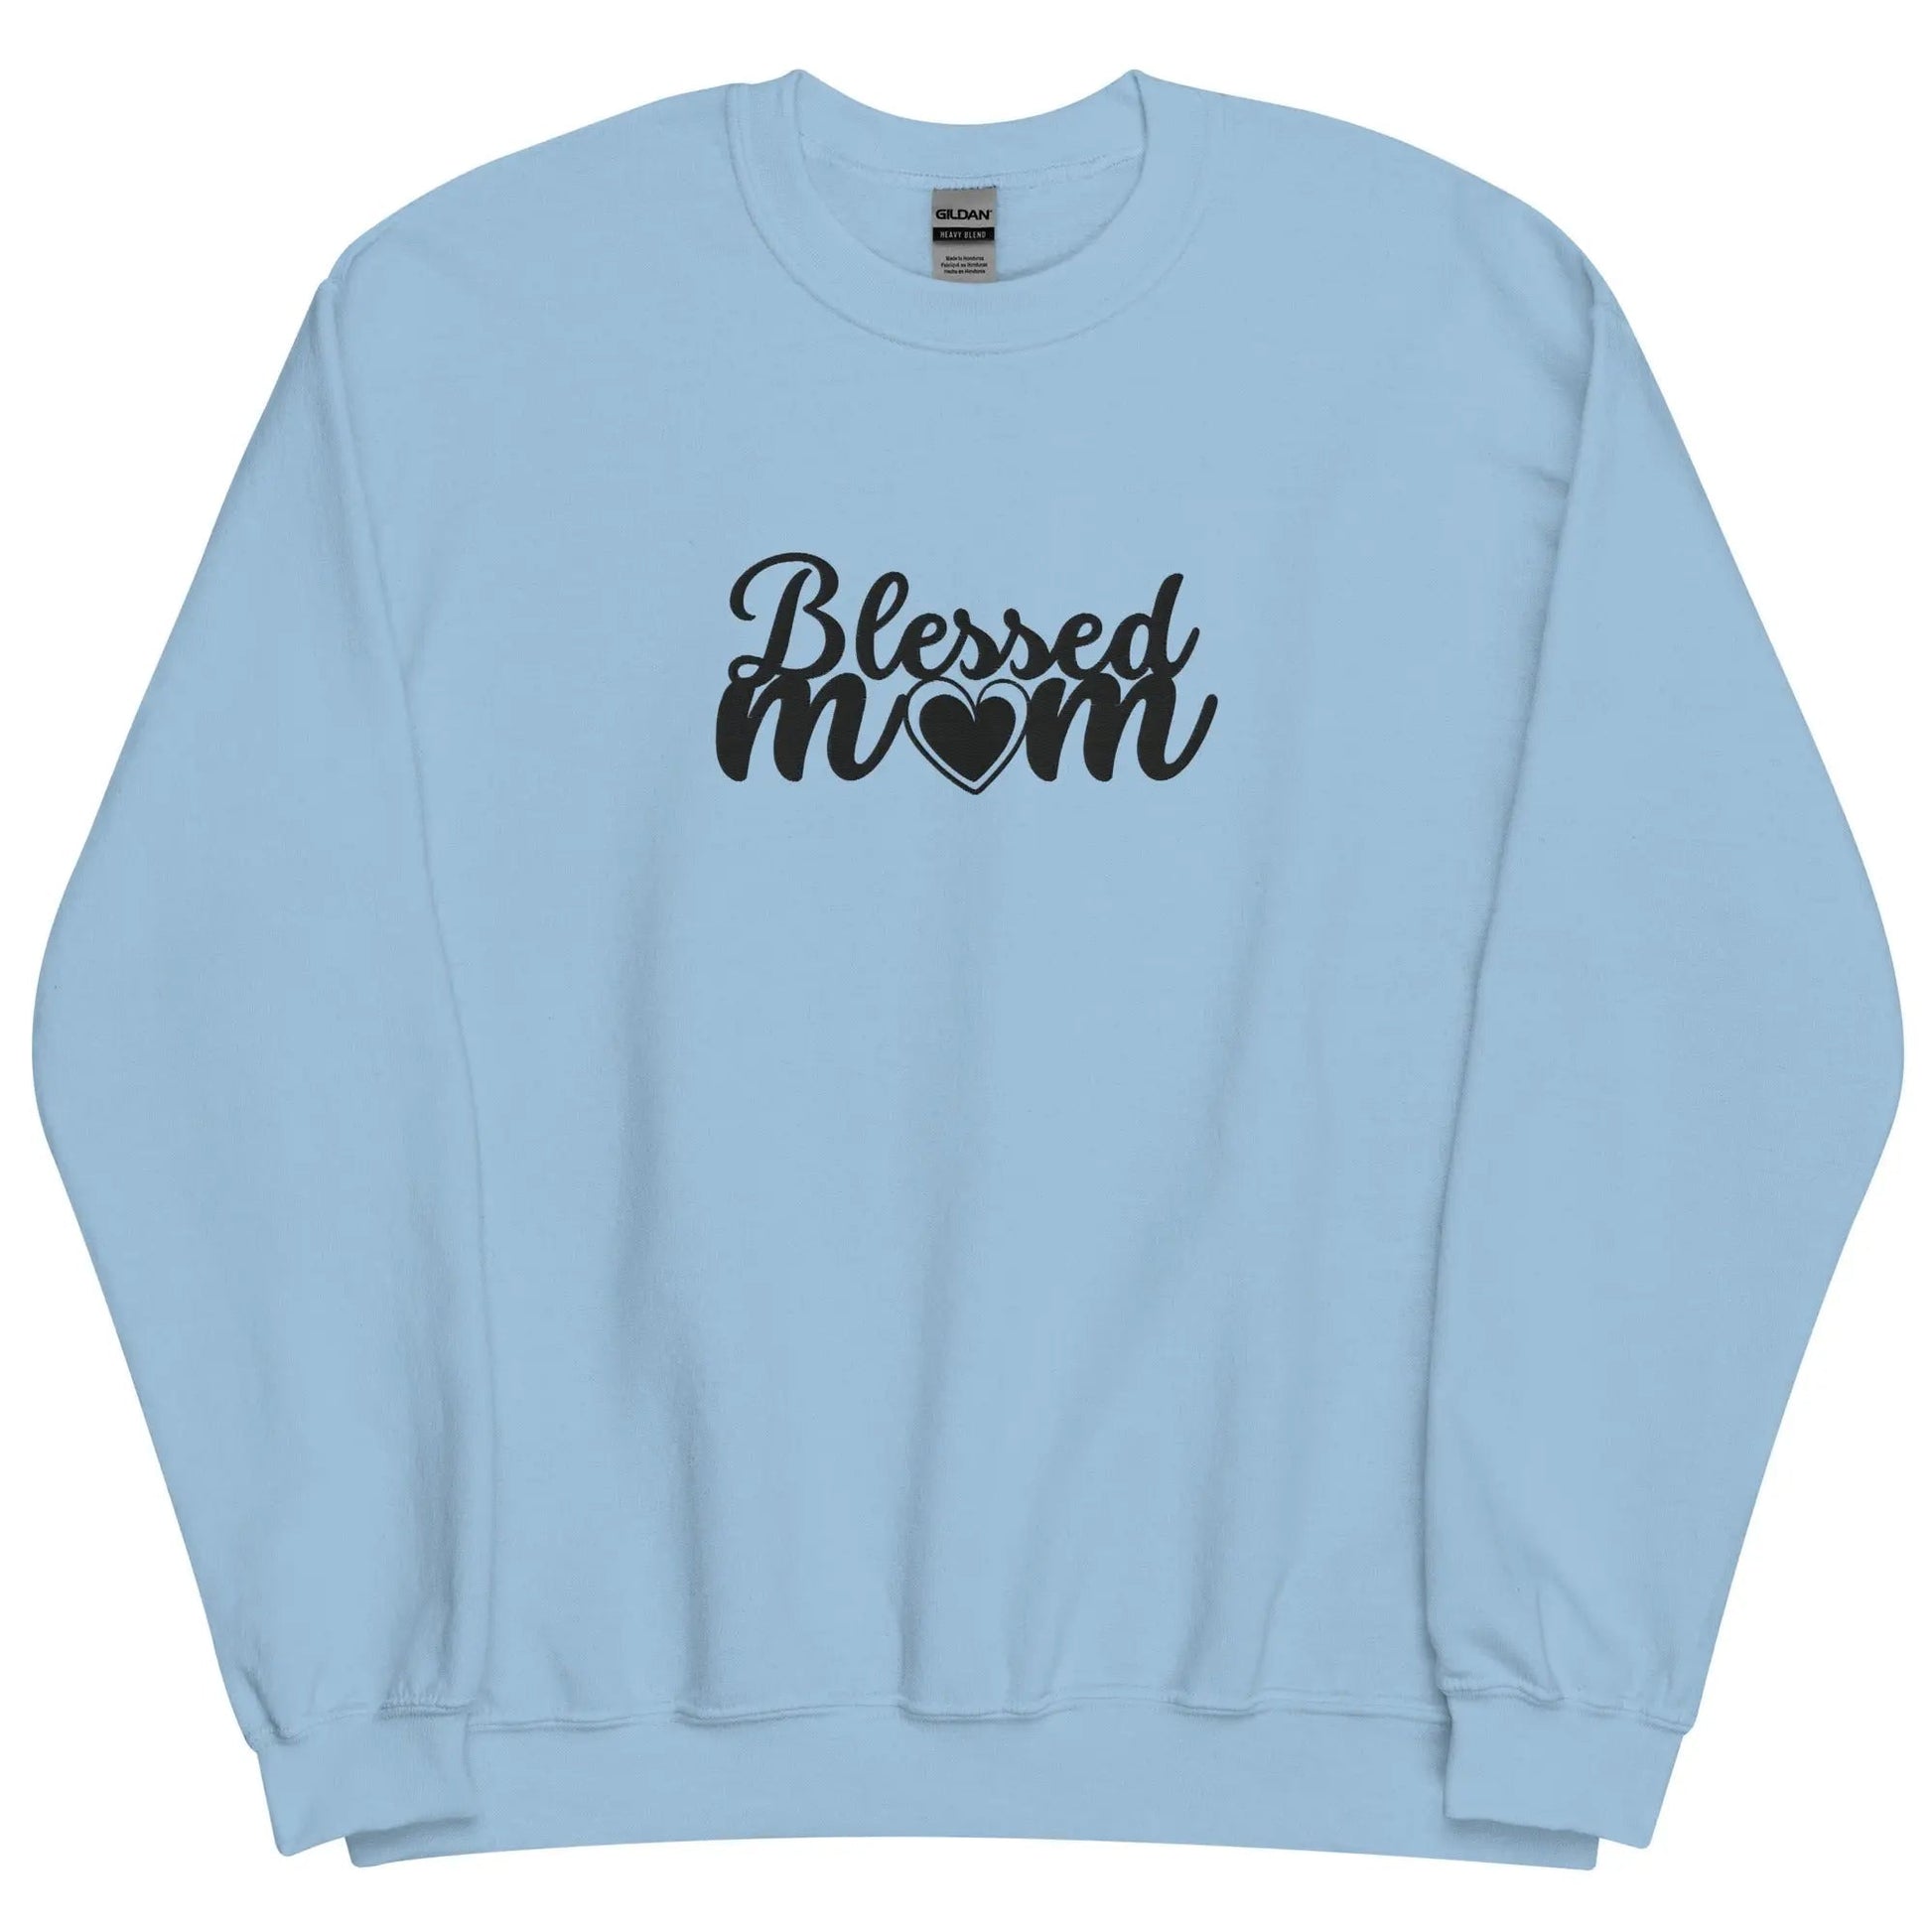 Embroidered Blessed Mom Embroidery Sweatshirt-clothes- sweater-Light Blue-S-mysticalcherry